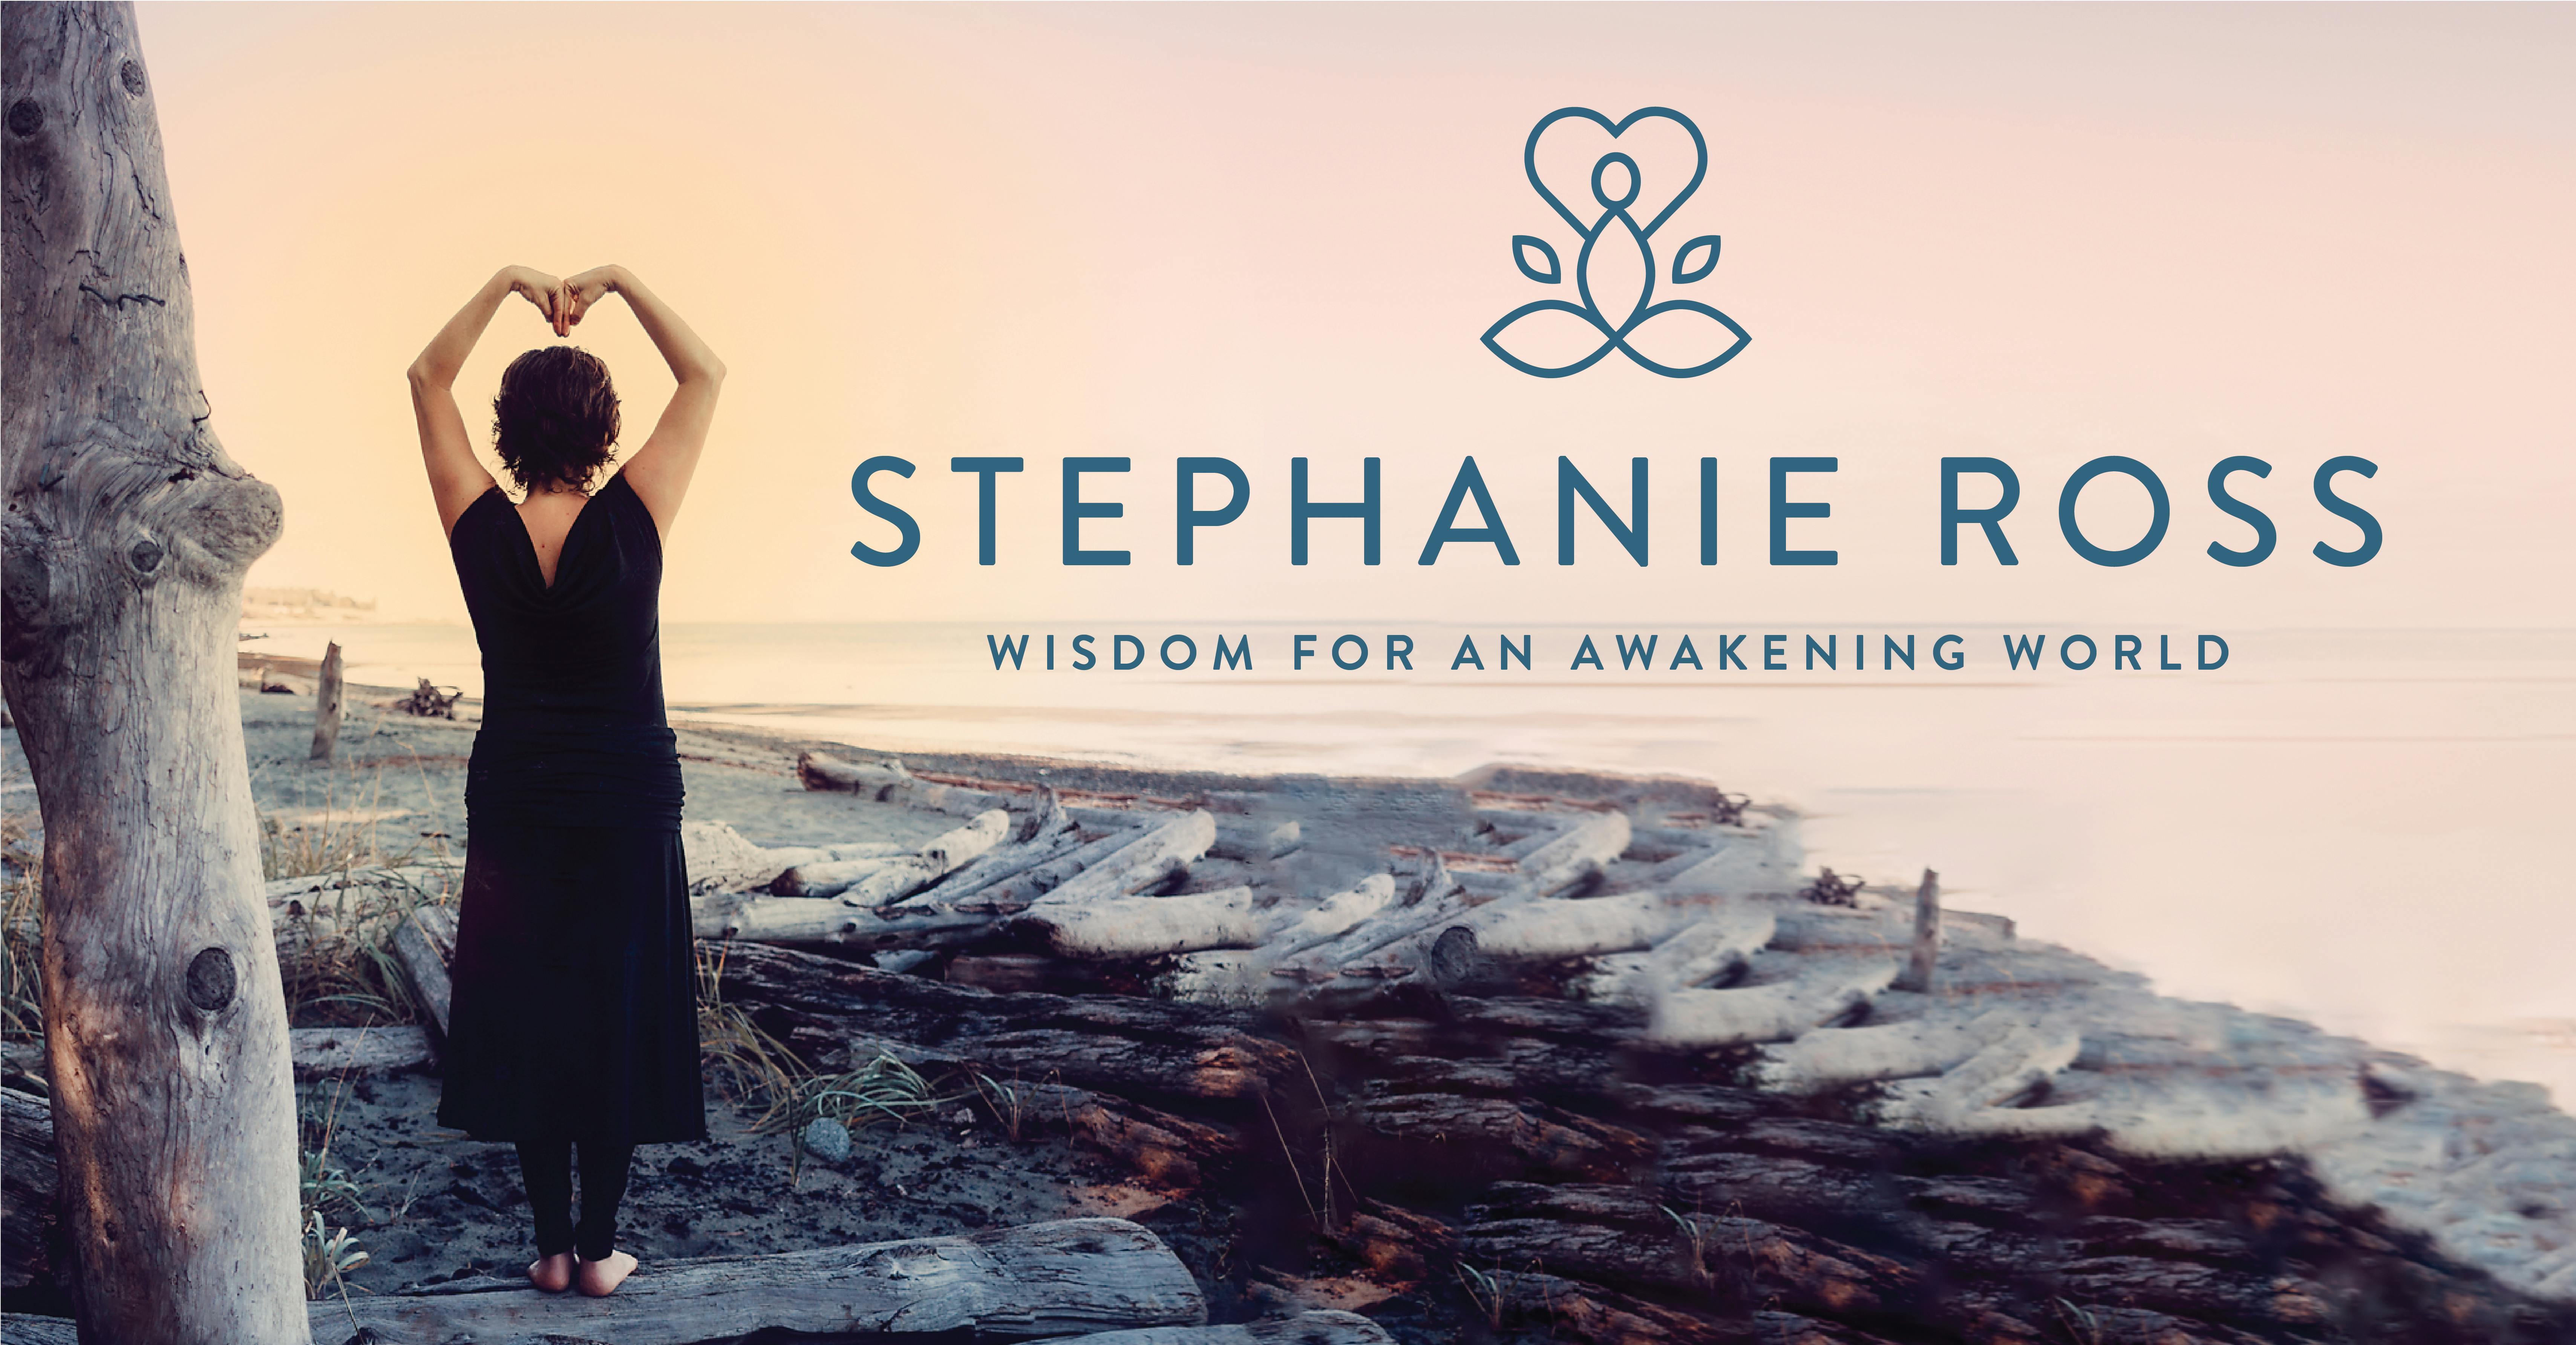 Book Navigating Change from the Inside Out: Remain Energized, Anchored, and Clear During LIfe's Daily Challenges and Changes. By Stephanie Ross. A peaceful woman is going Yuan Qigong on a sandy beach. She looks mindful and tranquil in stormy weather.